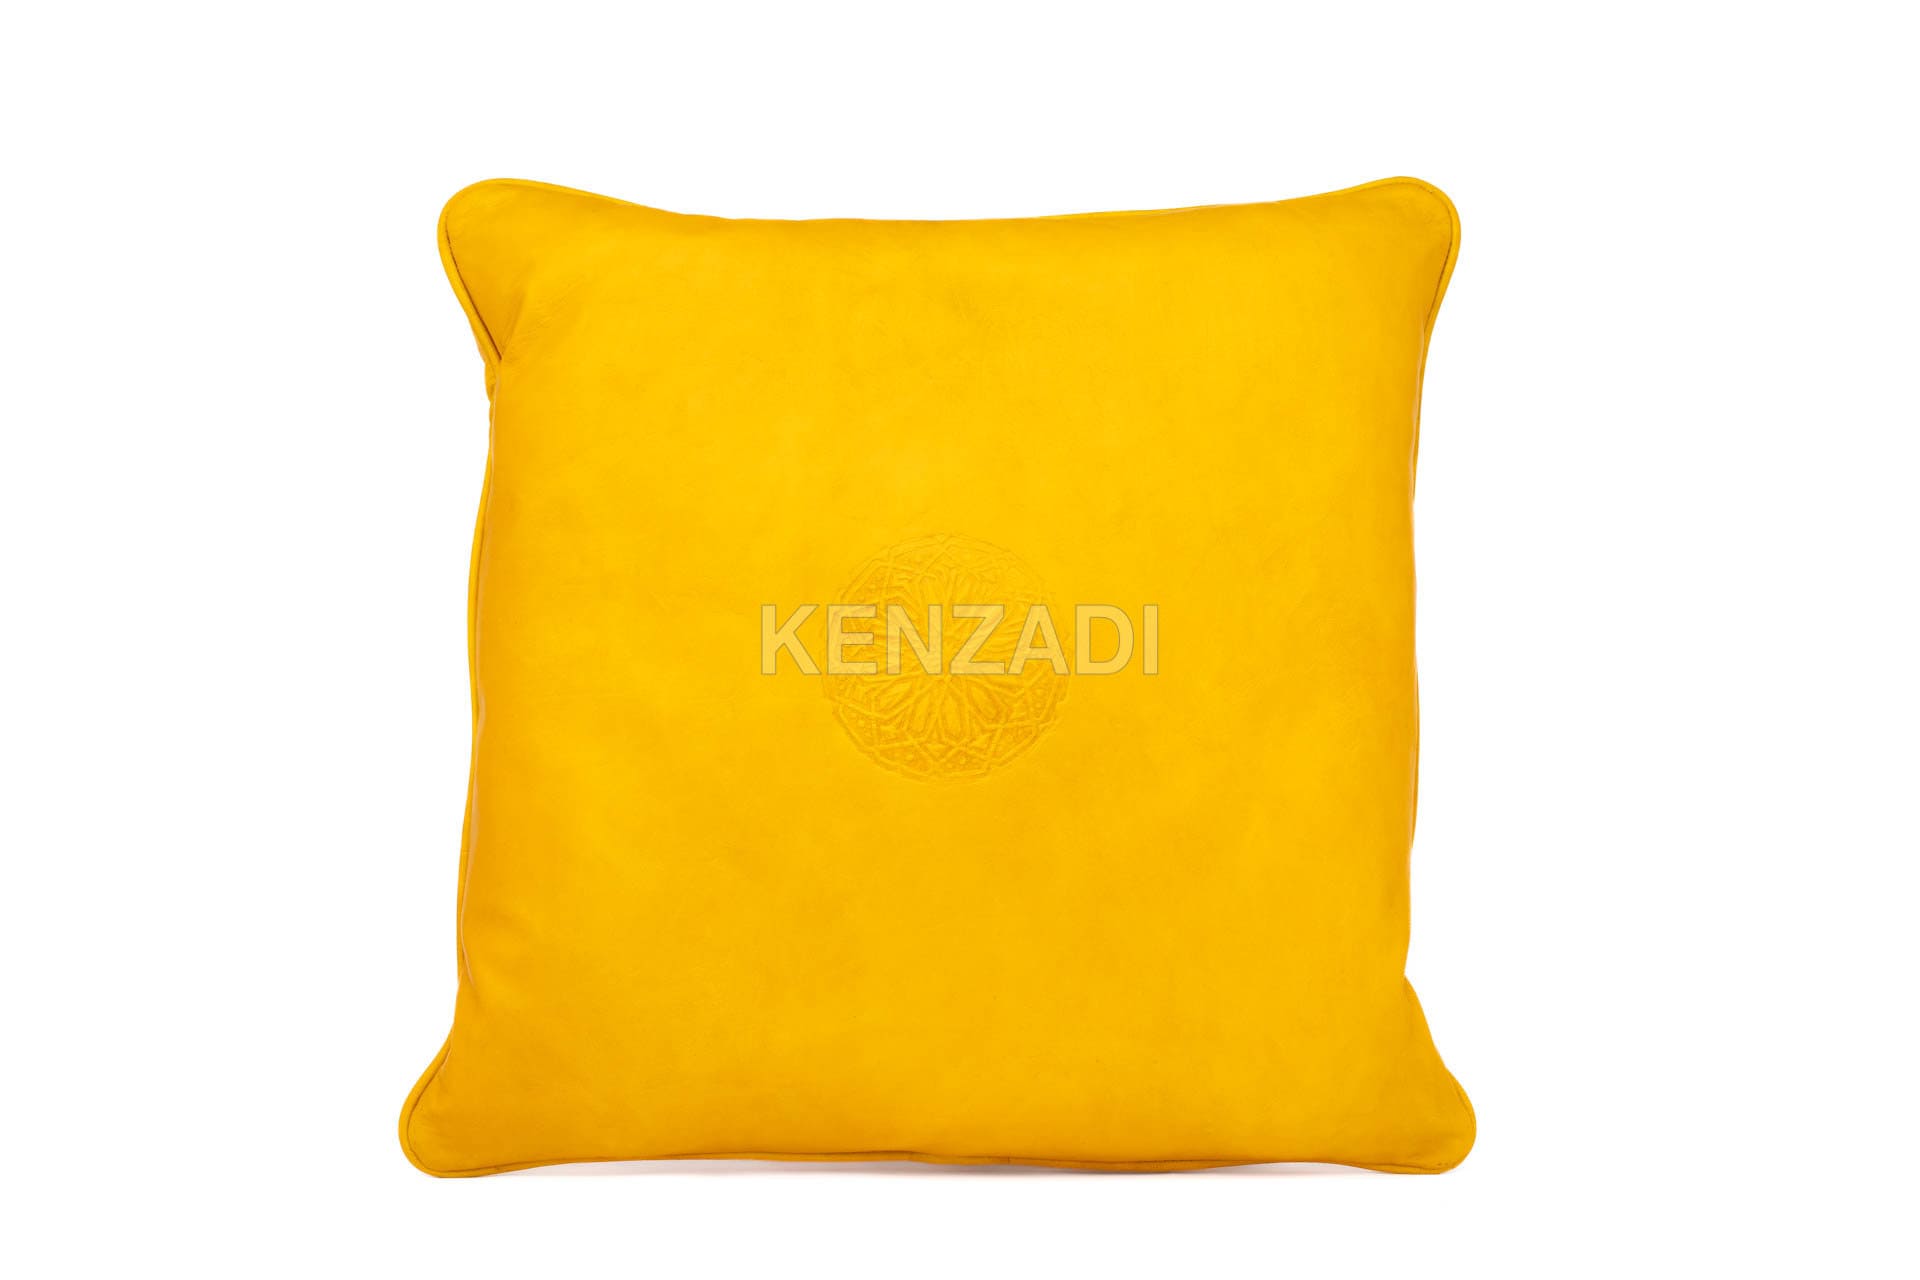 Handmade yellow leather pillowcase with Moroccan craftsmanship - stylish and versatile decor piece for indoor and outdoor use